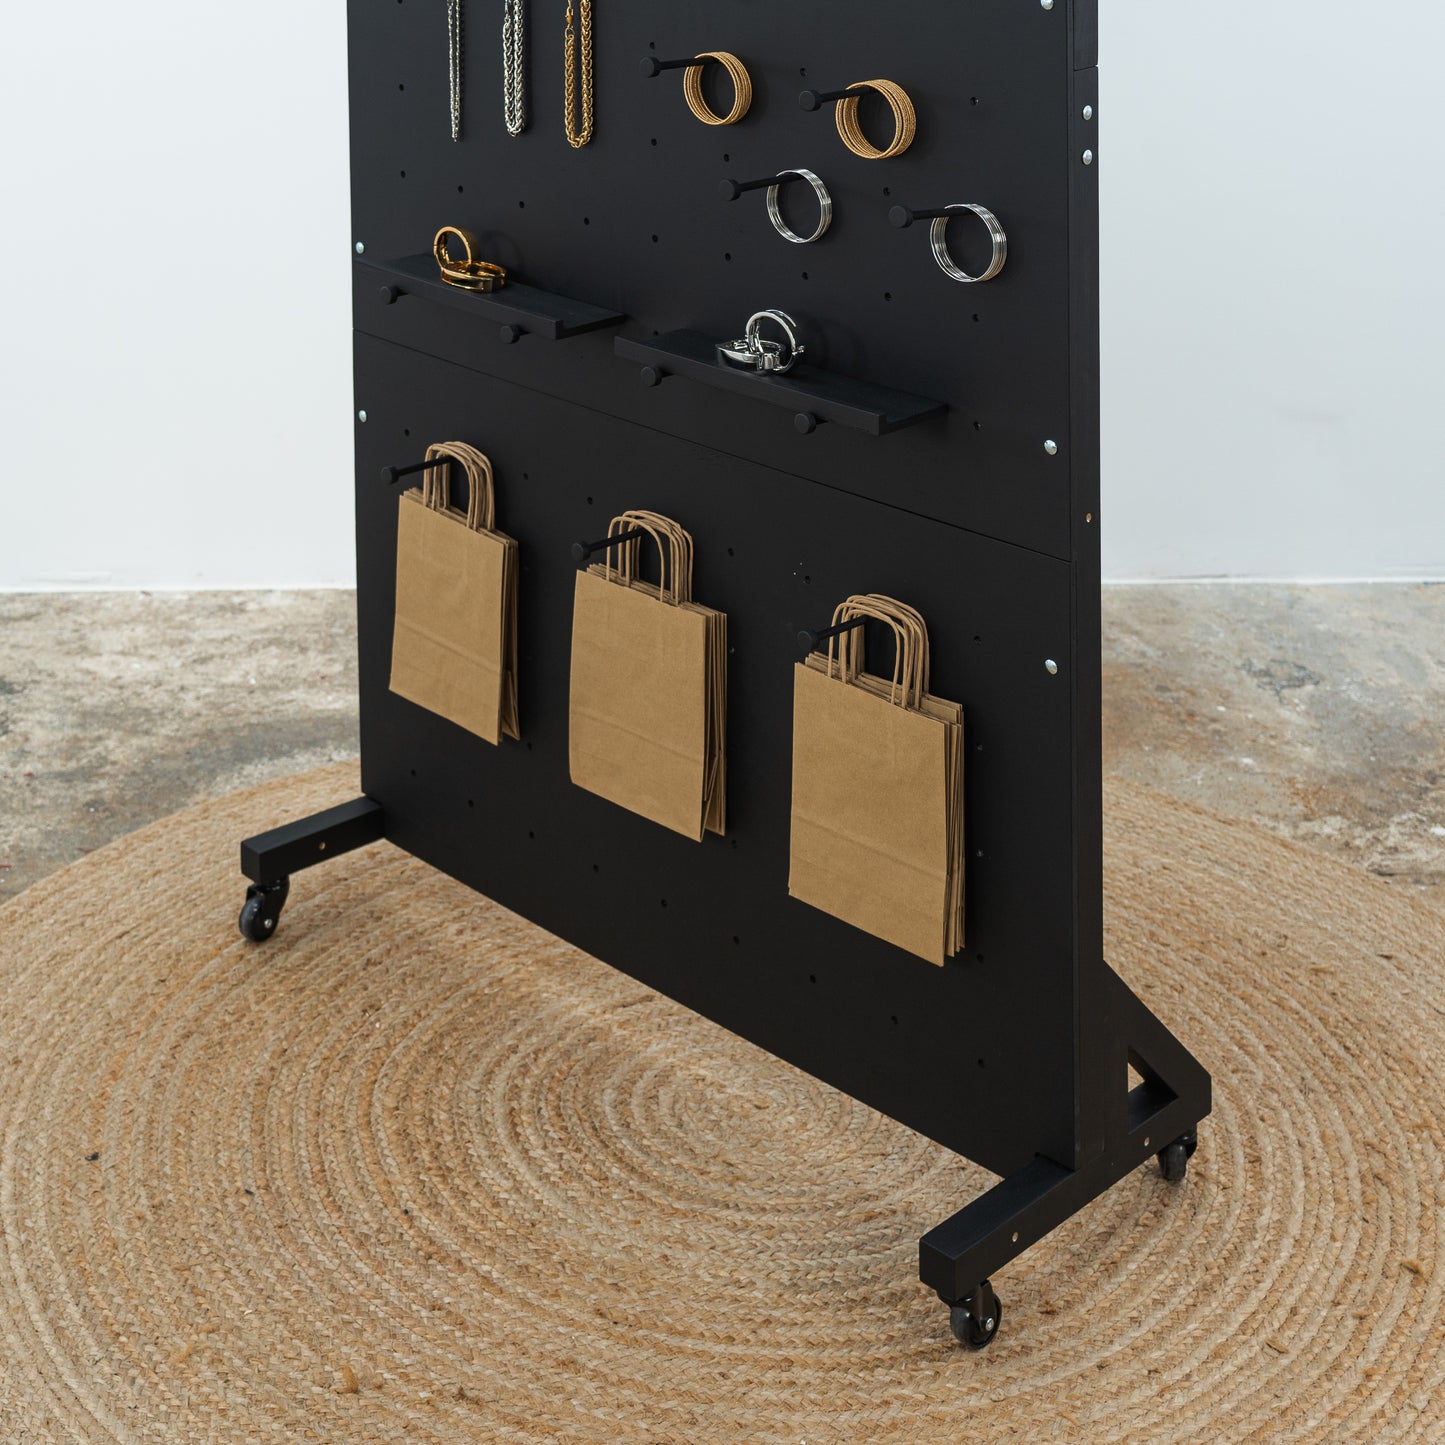 Display Pegboard VP-05-W-BL in black color for jewelry & accessories, on wheels, collapsible for trade show use